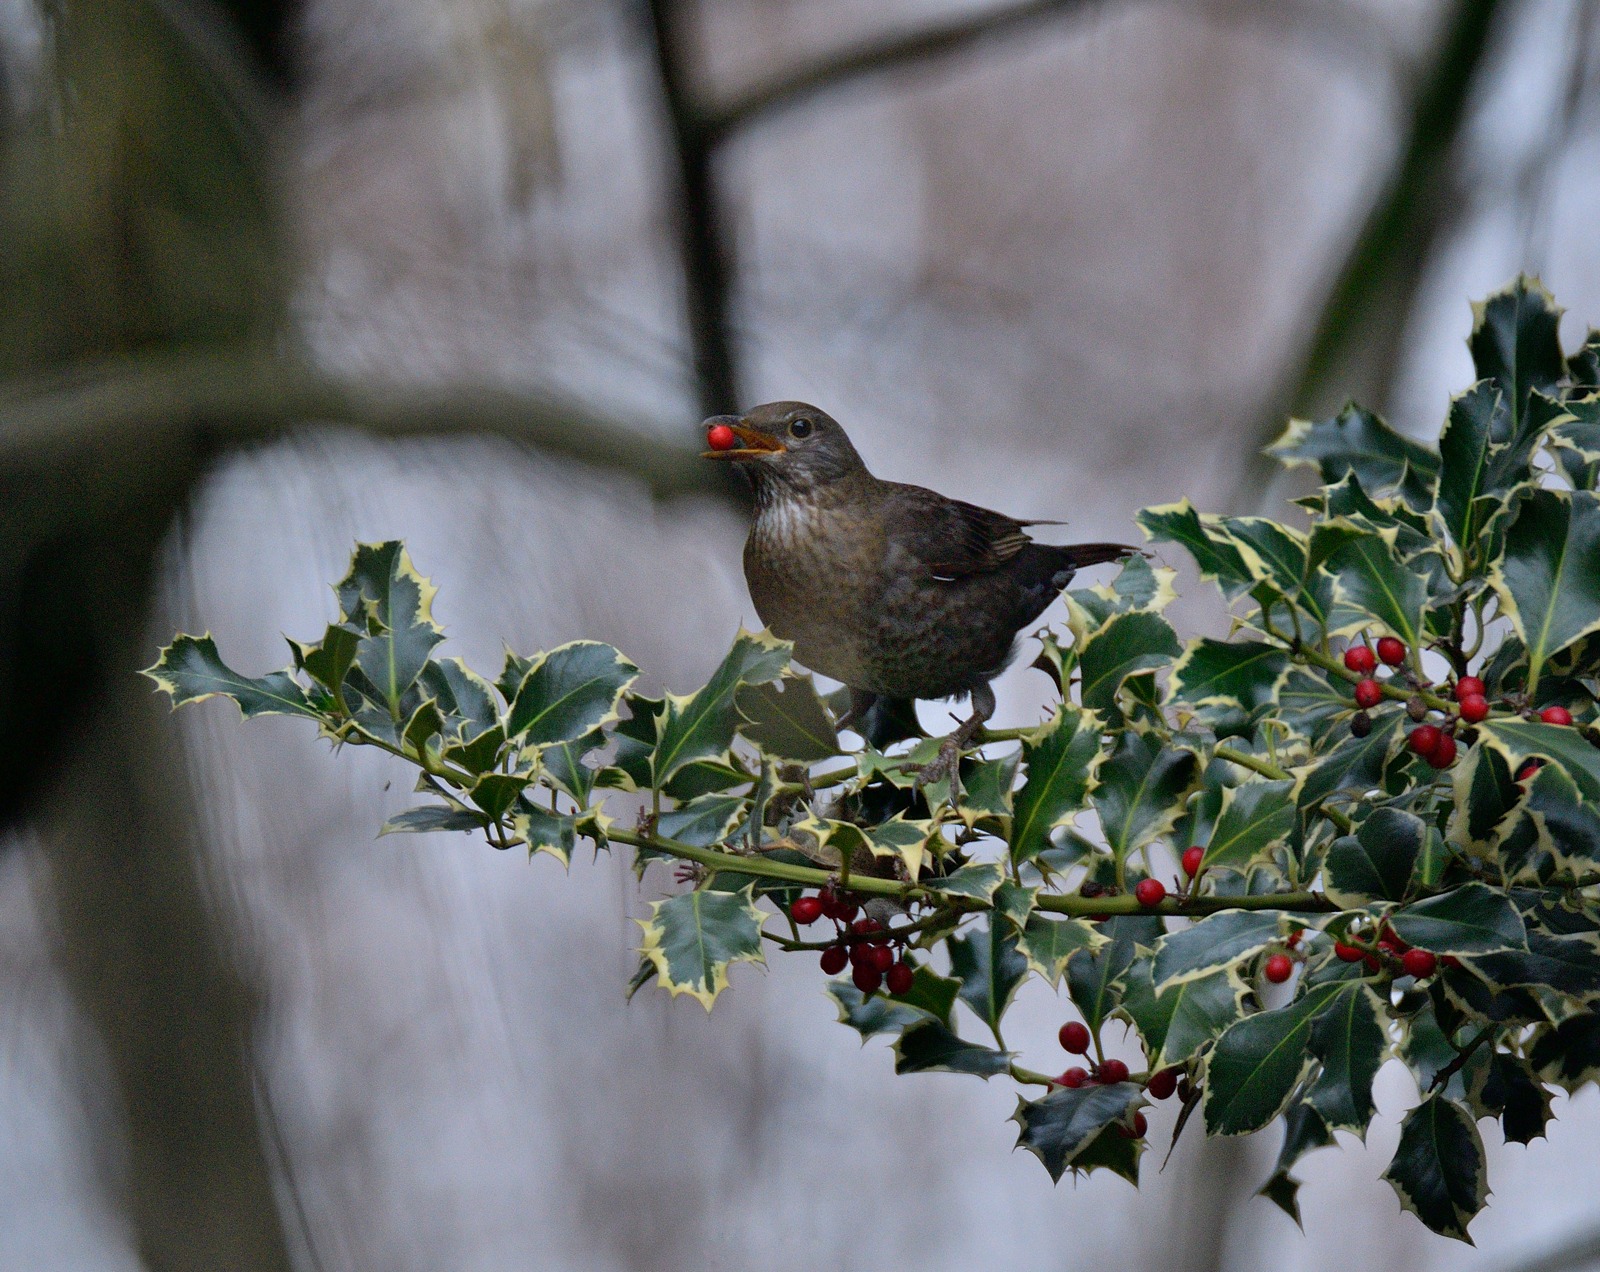 The blackbird and red berries...